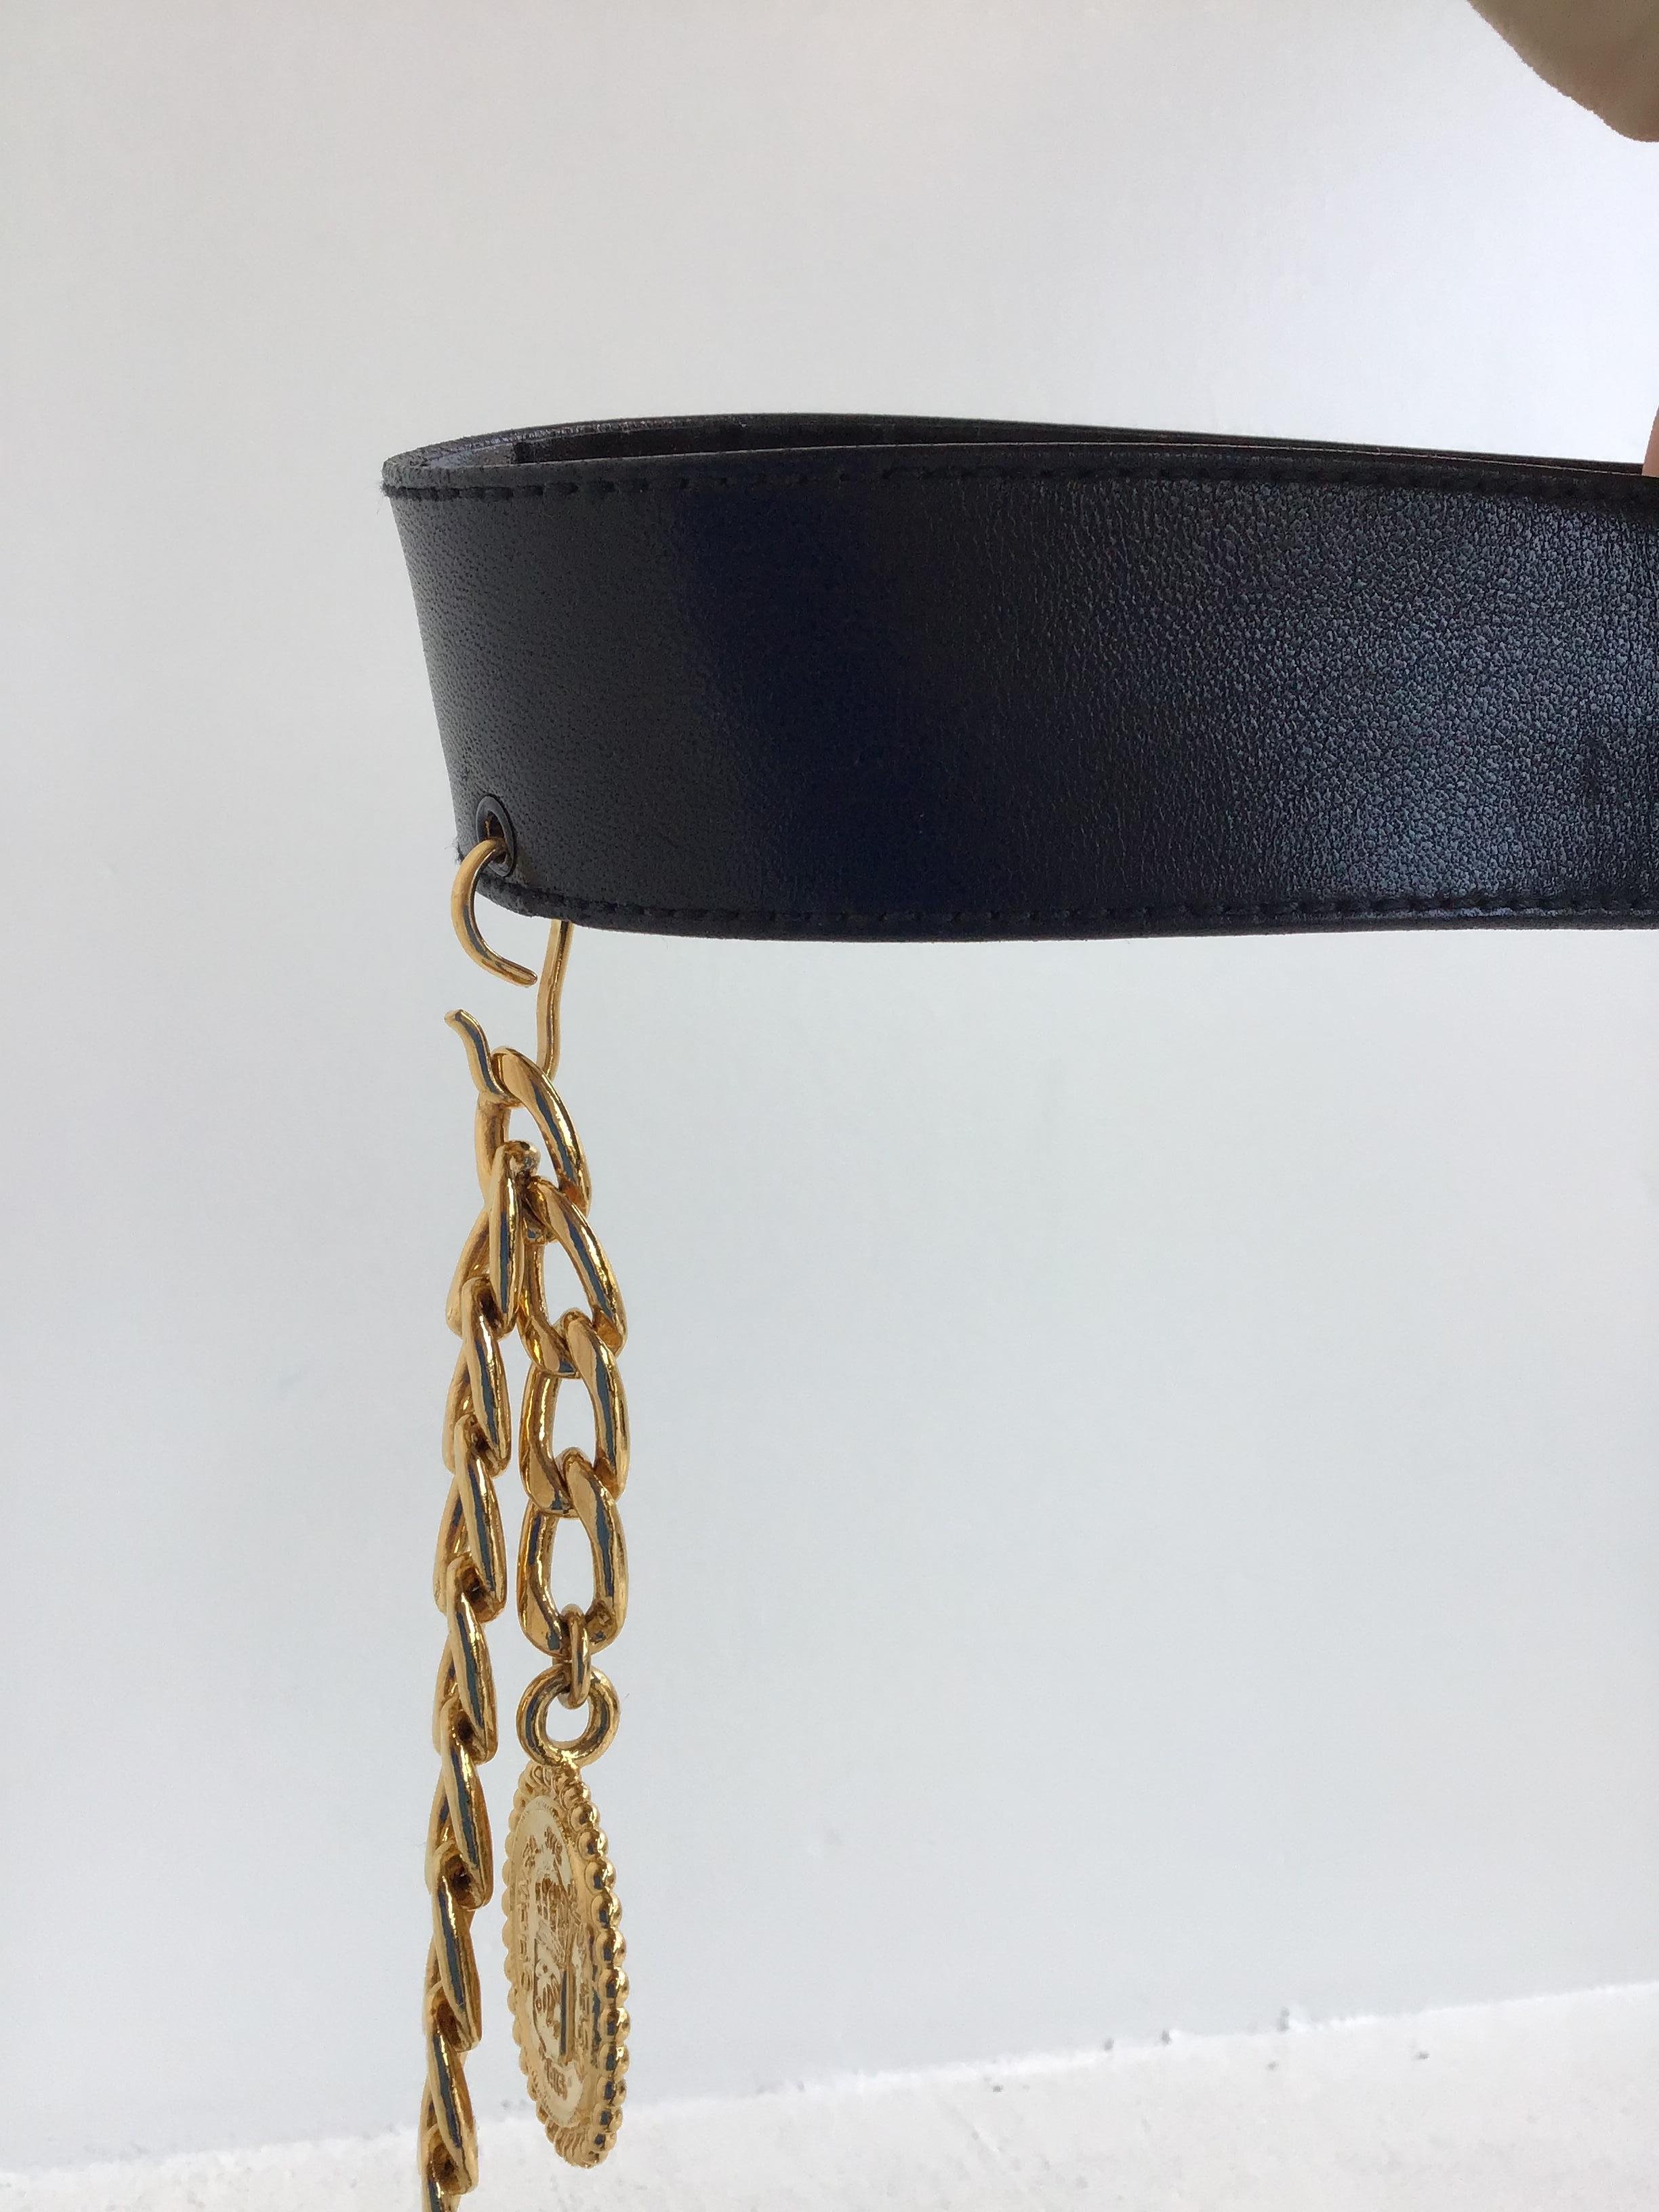 Chanel Black Leather Belt with Gold Chain 1